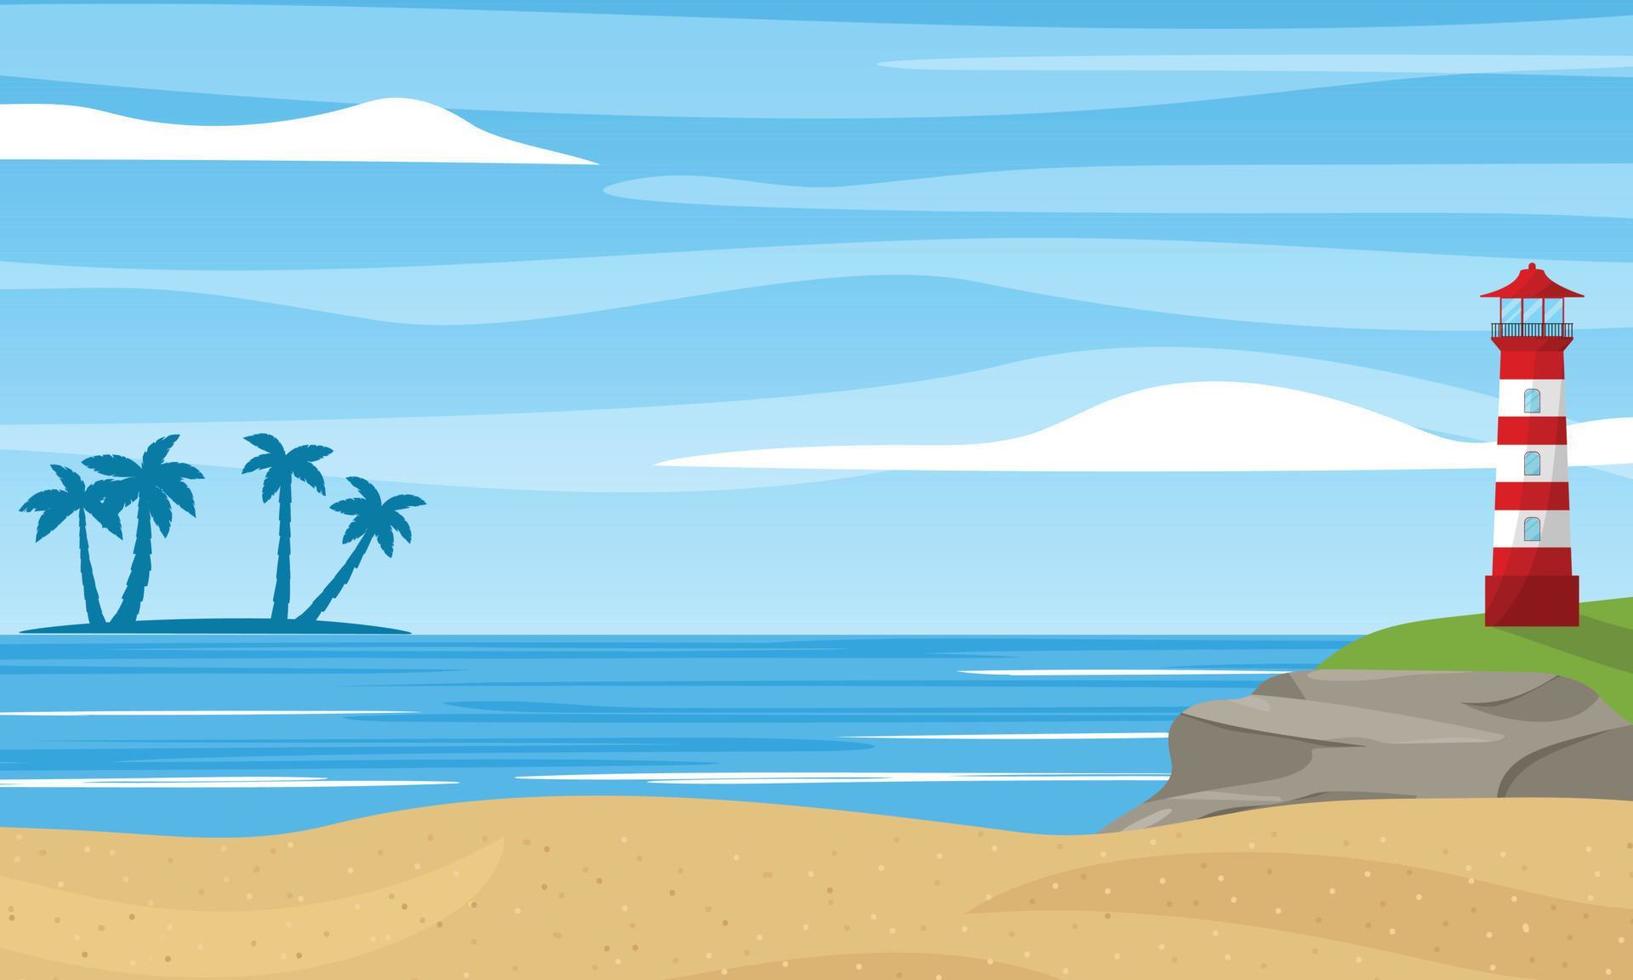 Summer landscape with lighthouse and tropical island silhouette. Sea or ocean scene. Vector illustration.